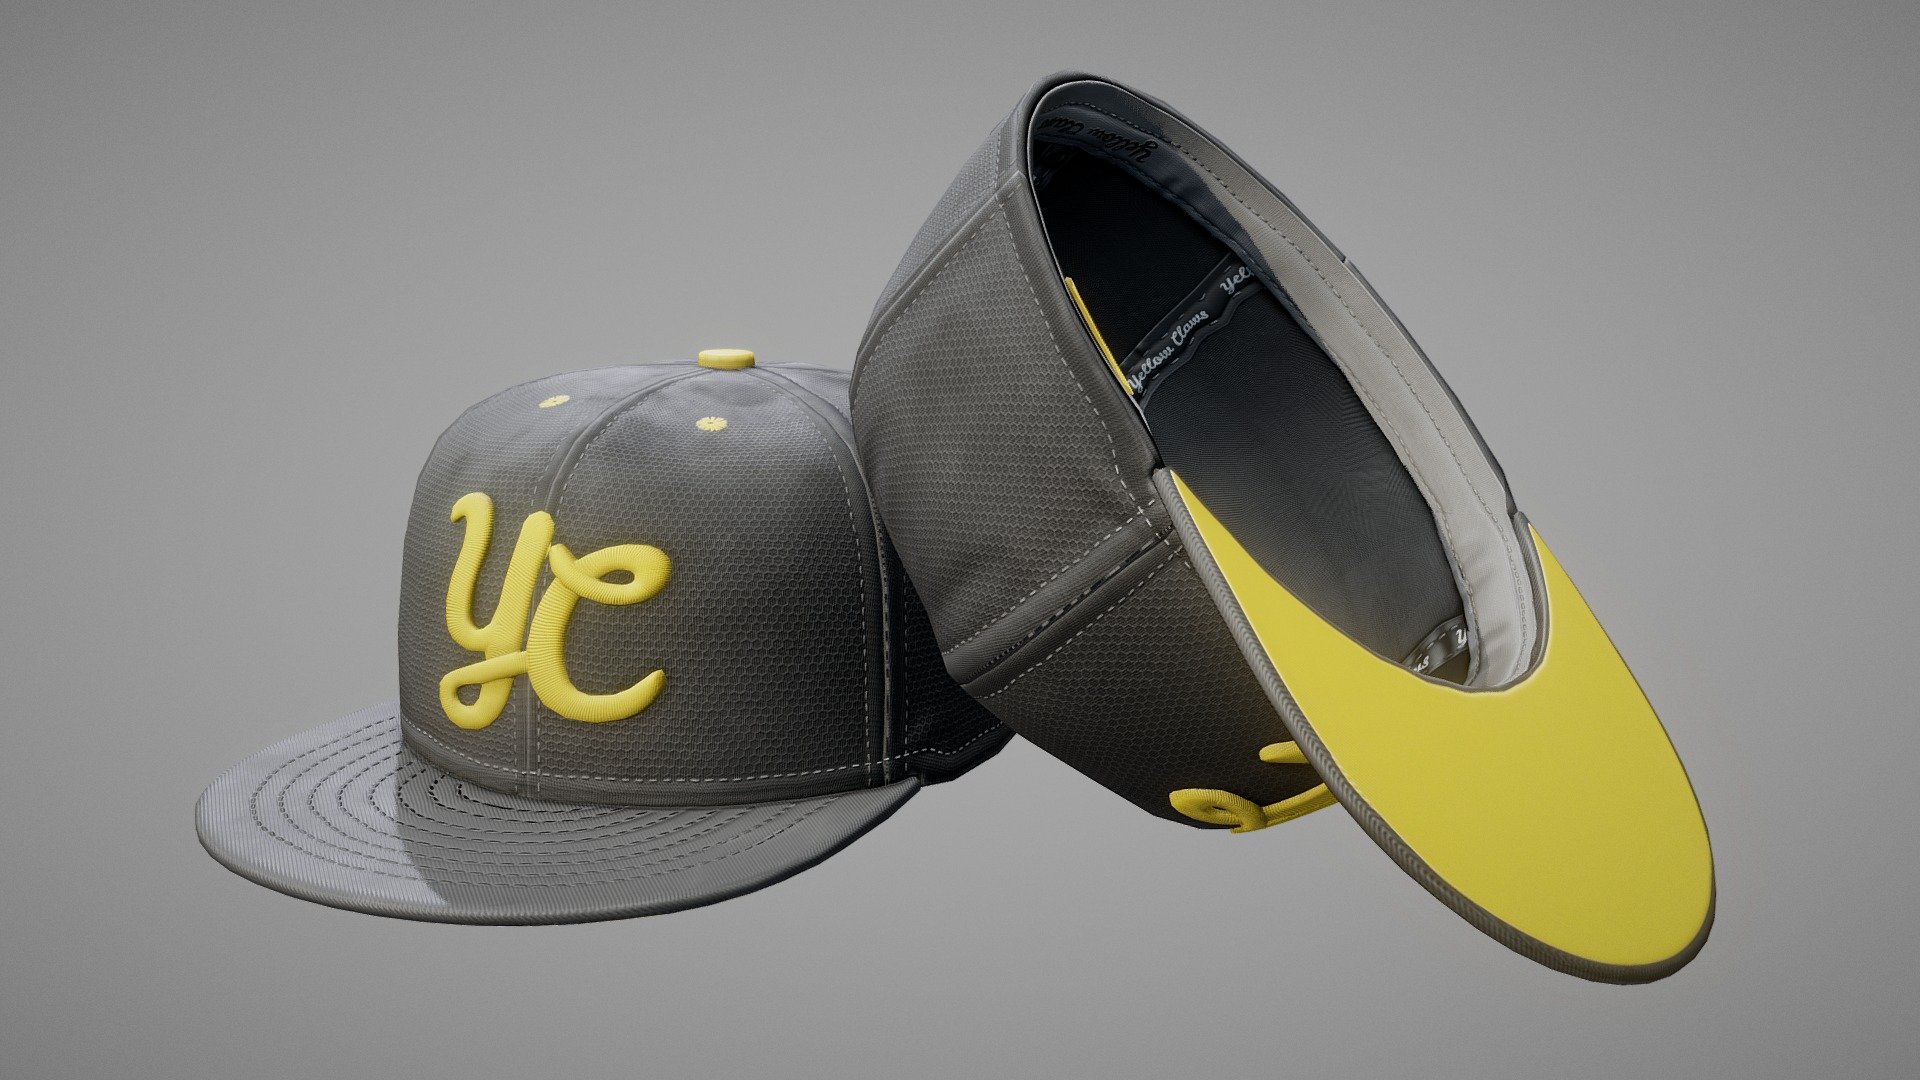 Game Ready Baseball Cap: 2148 tris; 1190 verts; 1x4096x4096 texture; Albedo, Metal/Gloss, Normal, Ambient Occlusion; Pristine/Worn variants 3d model